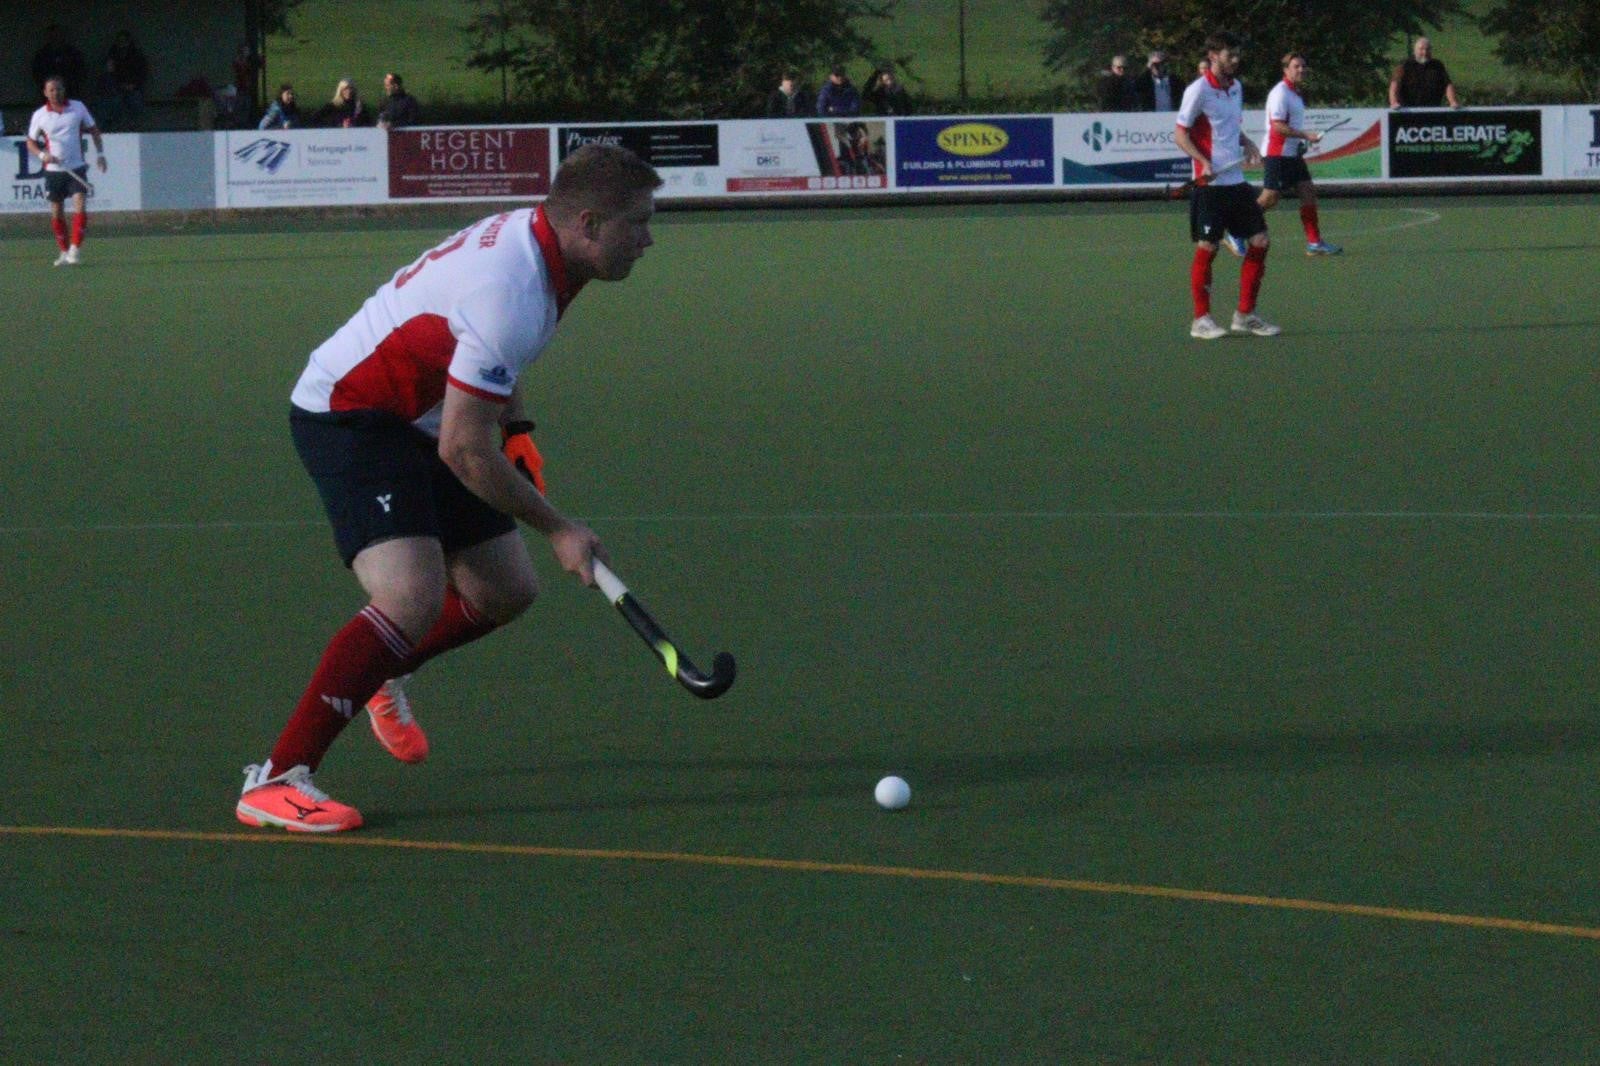 2 - England: Gibson Name Lives On At Doncaster On And Off The Pitch - Rod Gilmour of The Hockey Paper speaks to Doncaster men’s player coach Matt Gibson on Conference North hopes and remembering his brother Andy